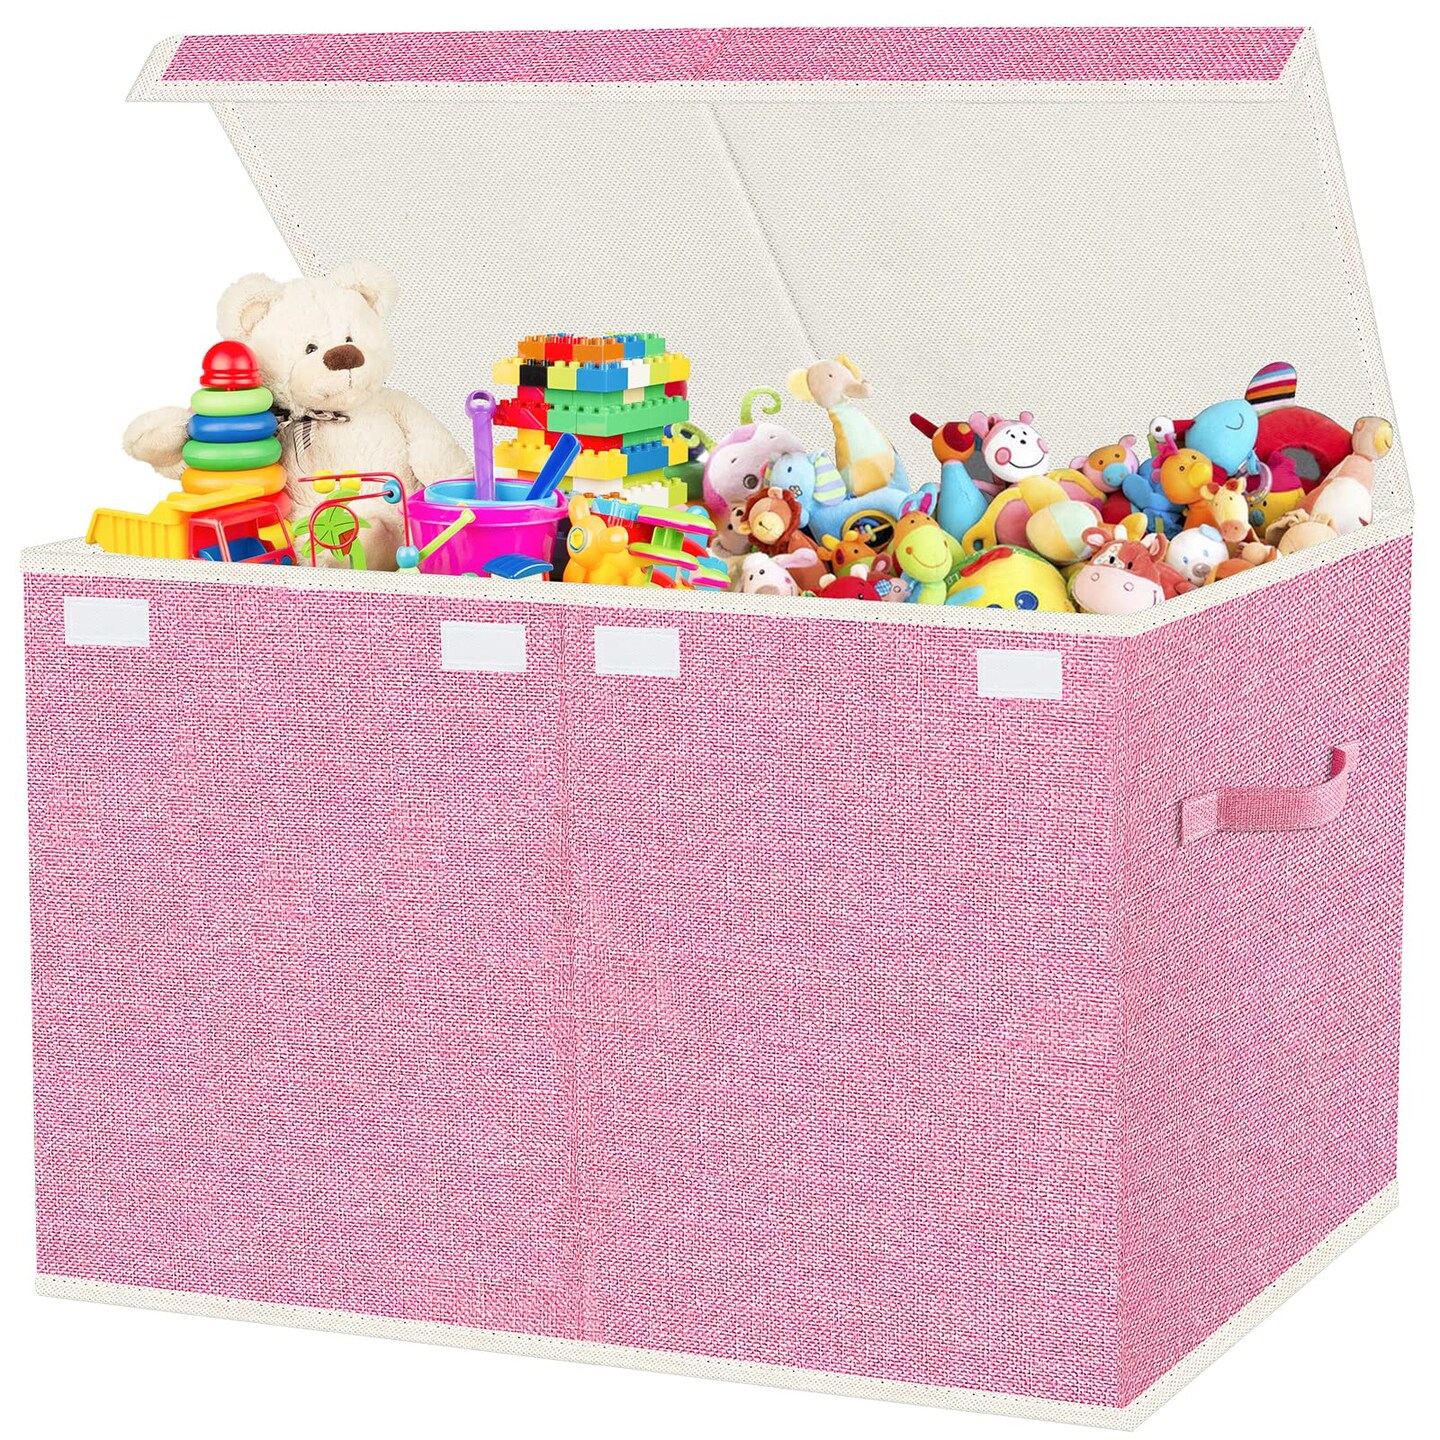 VERONLY Large Toy Box Chest Storage with Lid - Collapsible Kids Toys Boxes Organizer Bins Baskets with Handles for Boys, Girls,Nursery,Playroom,Clothes,Blanket,Bedroom(Pink)